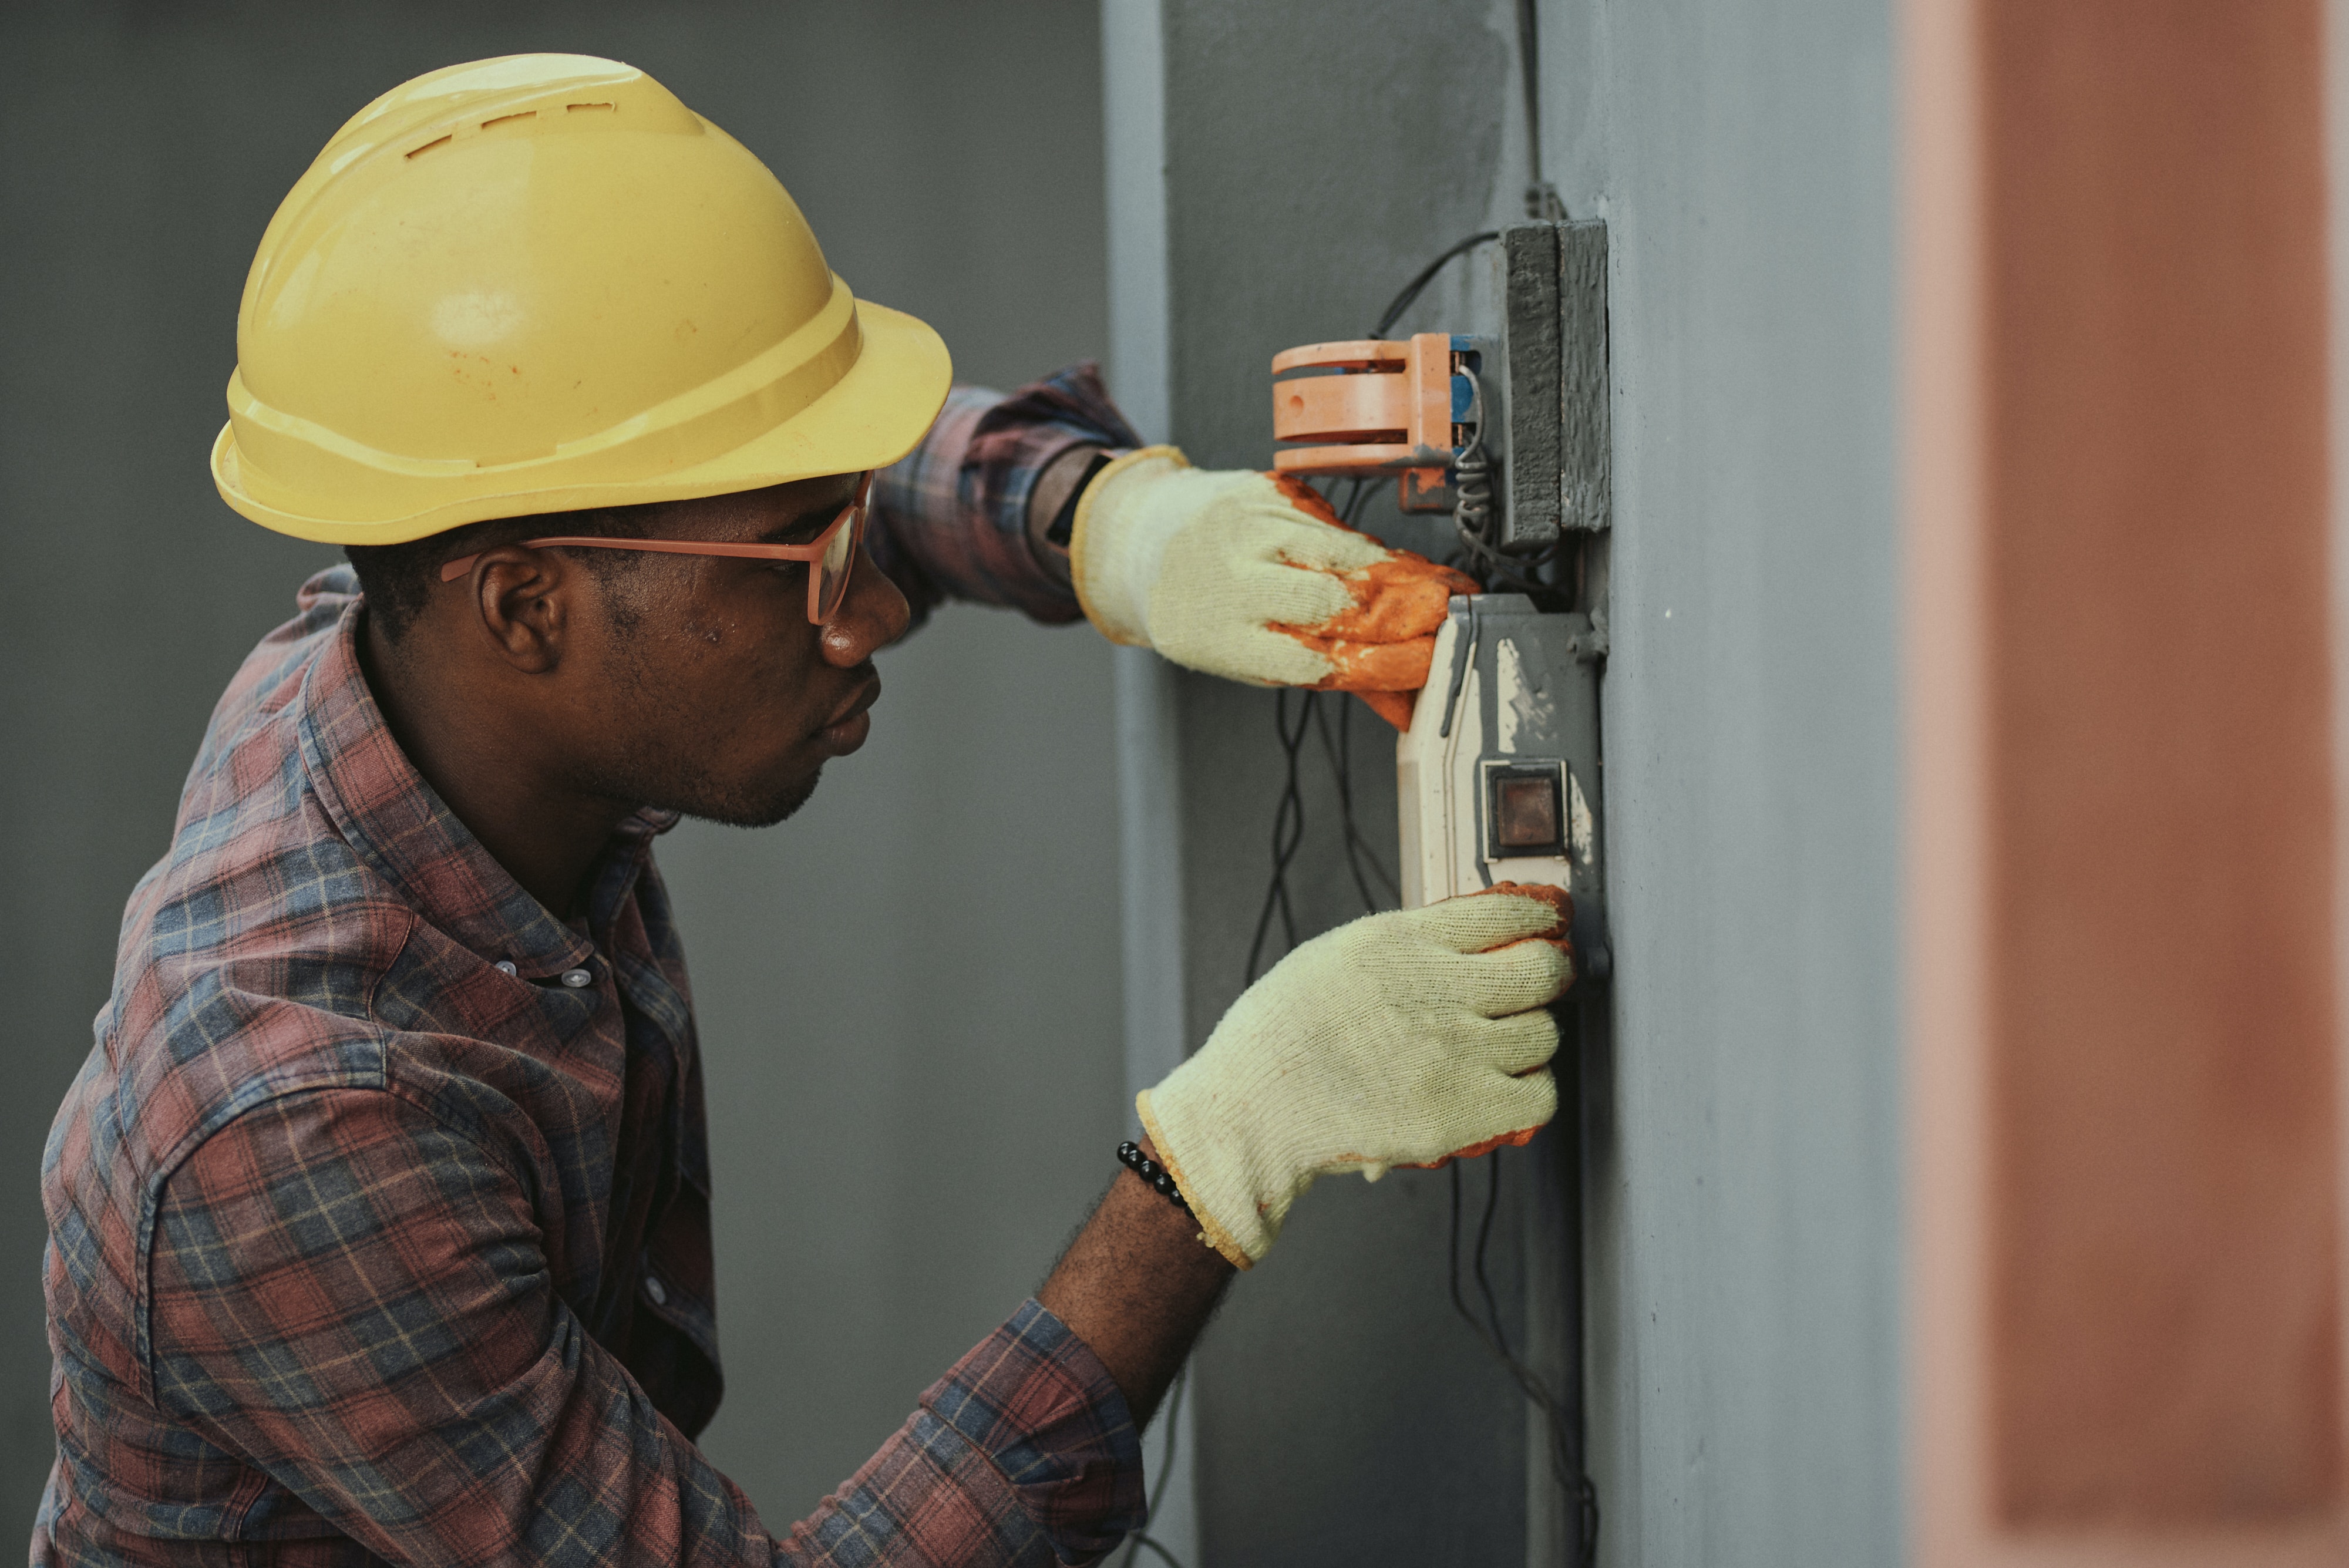 A man works at an electric junction box